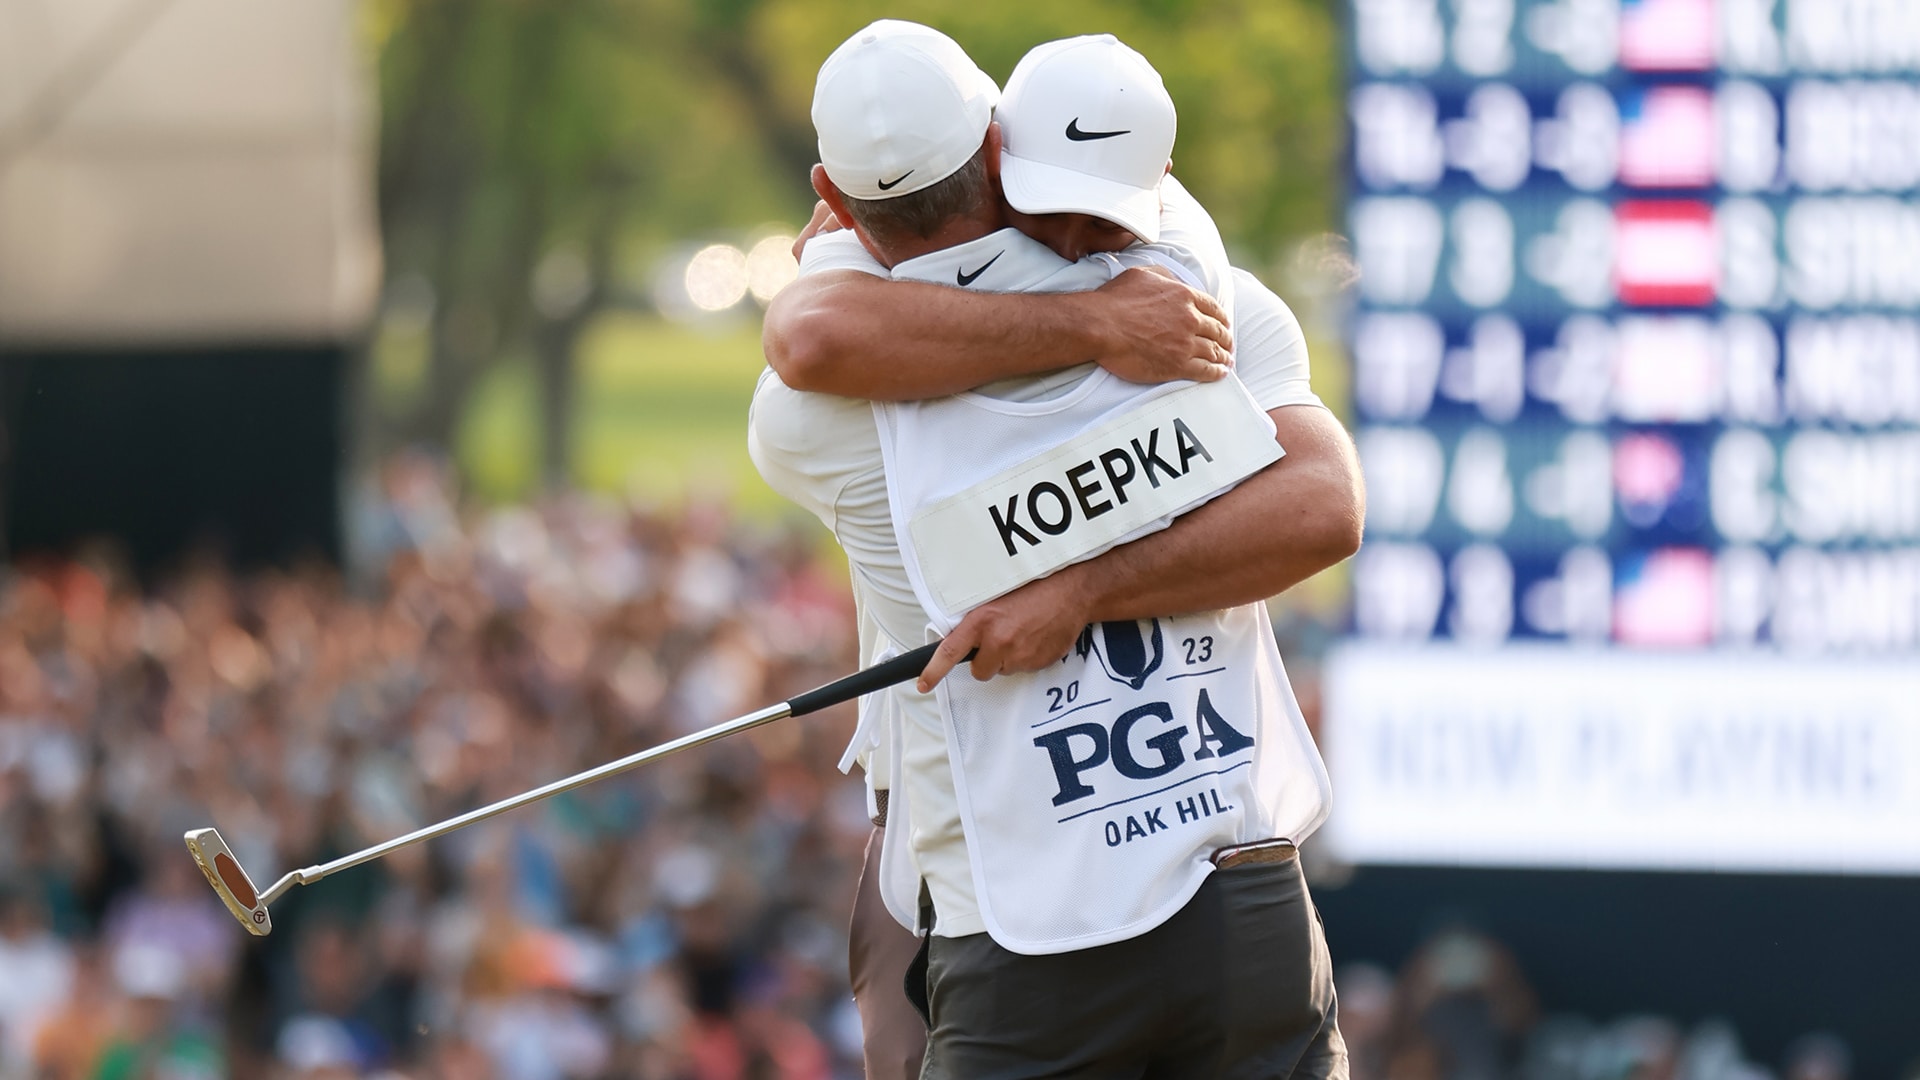 2023 PGA: Major No. 5 a win for Team Koepka: Those who brought Brooks back from the brink